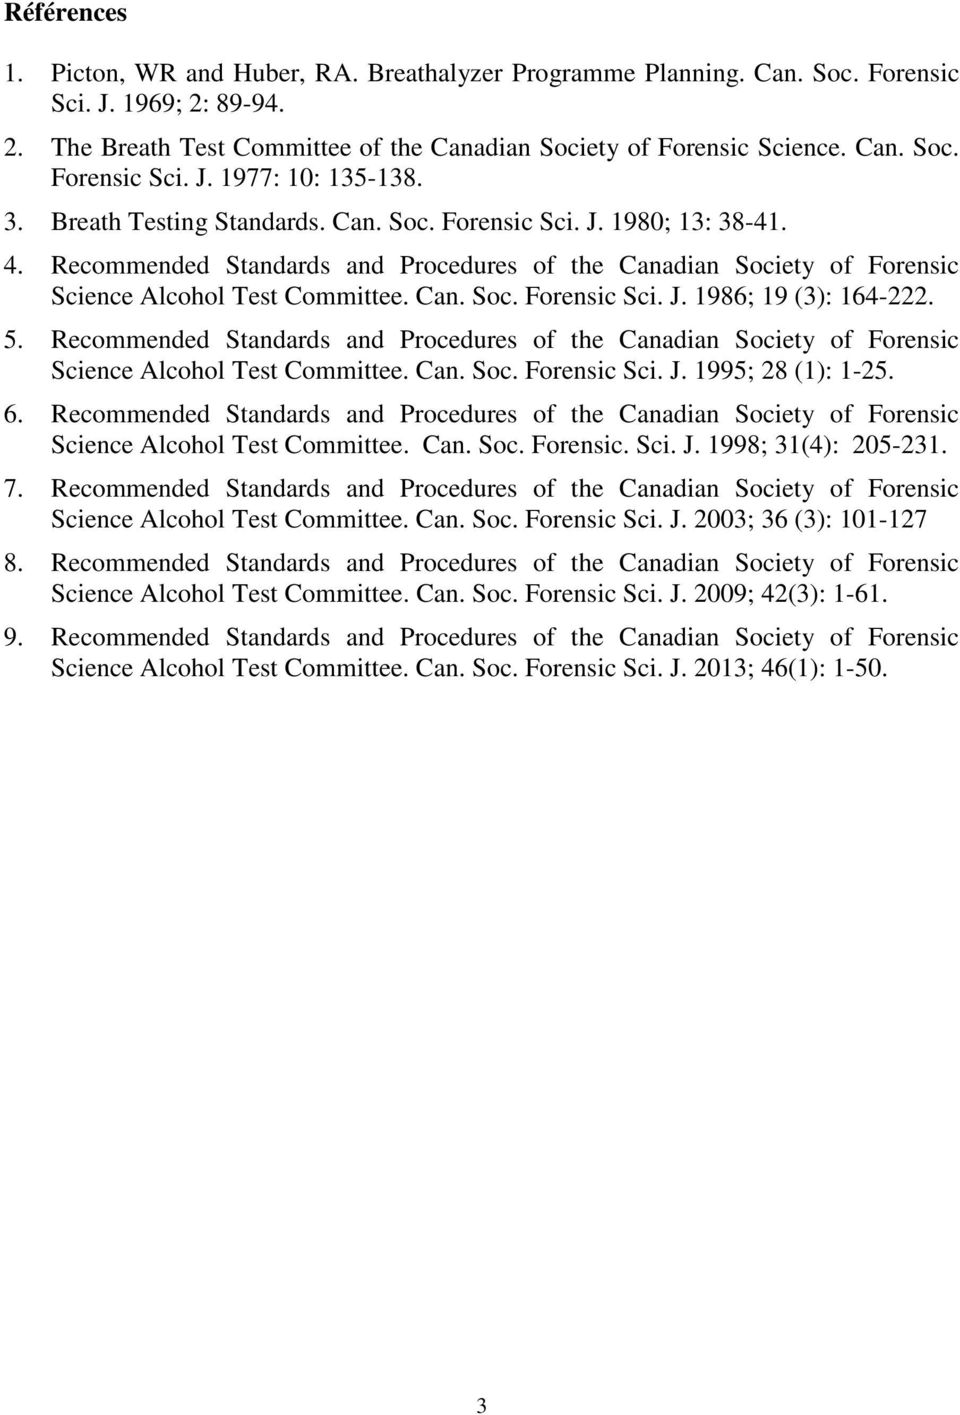 5. Recommended Standards and Procedures of the Canadian Society of Forensic Science Alcohol Test Committee. Can. Soc. Forensic Sci. J. 1995; 28 (1): 1-25. 6.